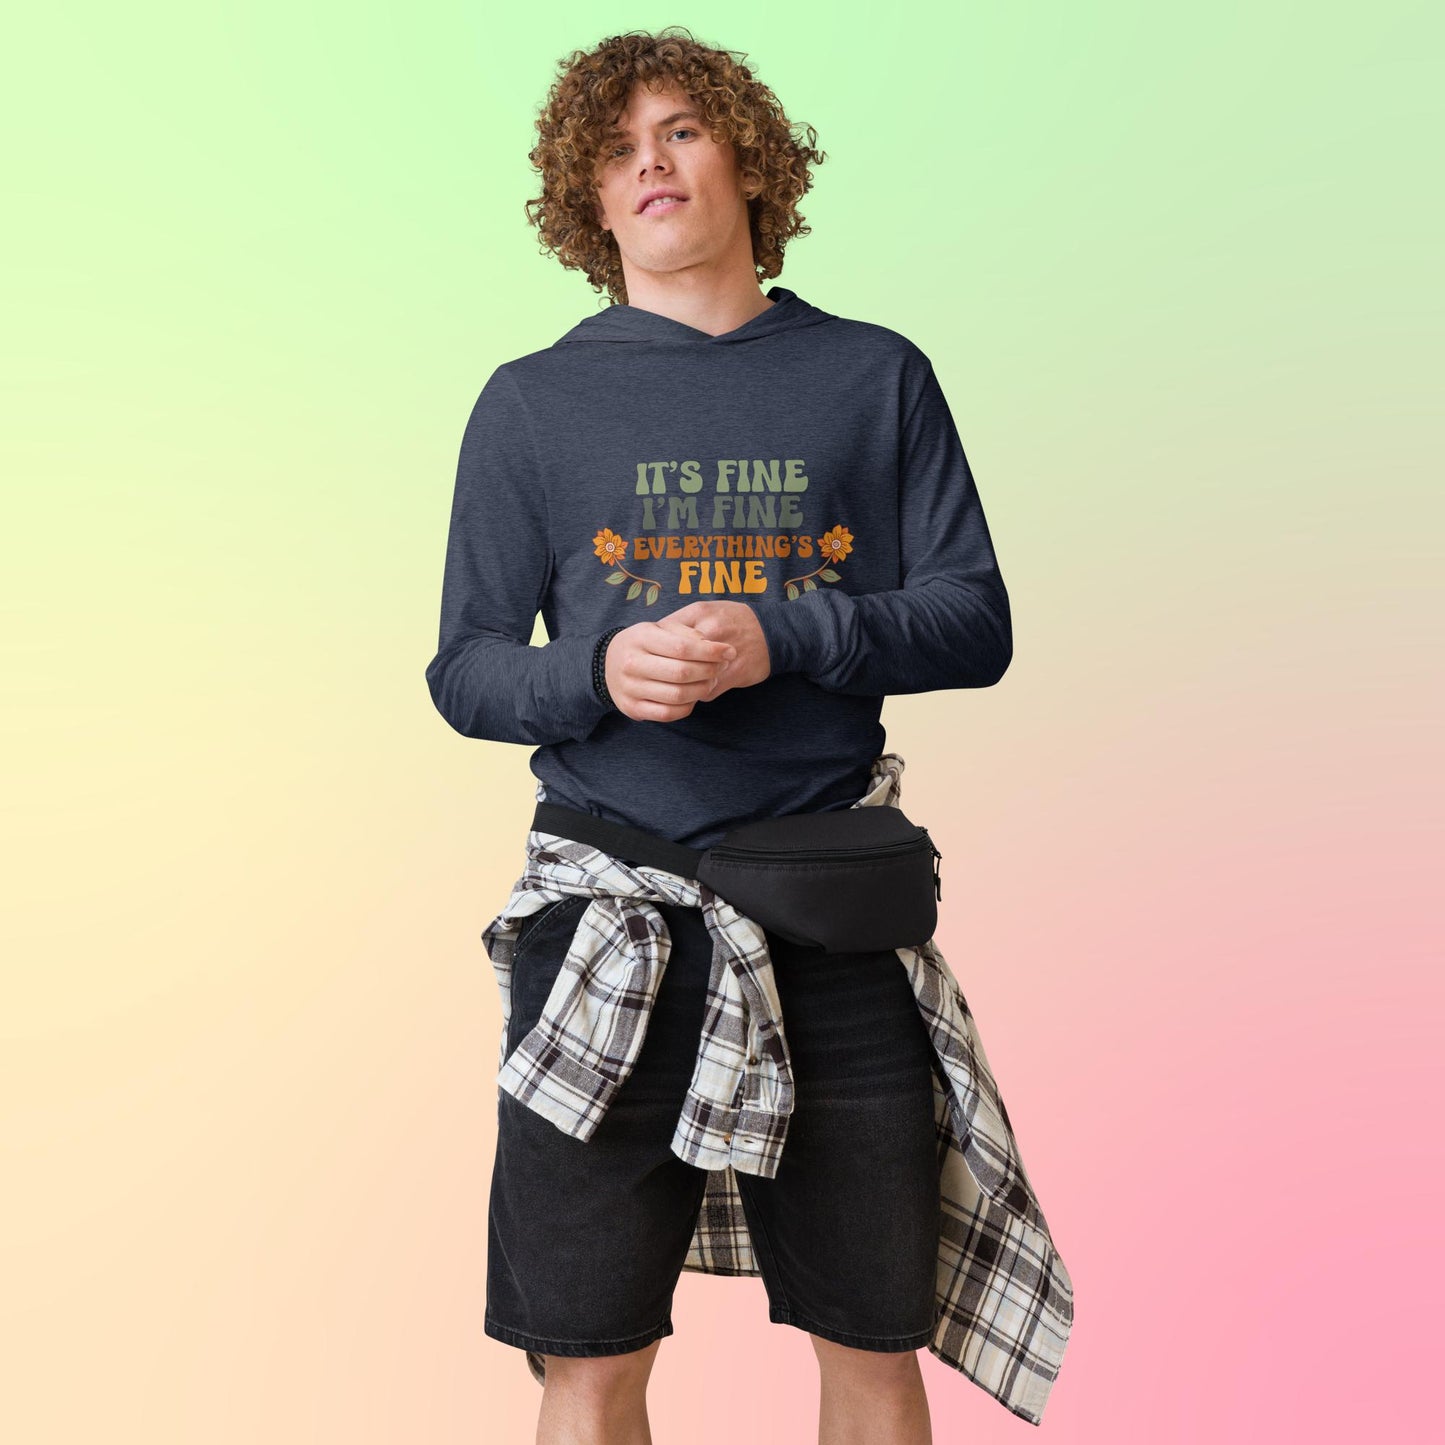 It's fine, I'm fine, everything is fine - Hooded long-sleeve tee